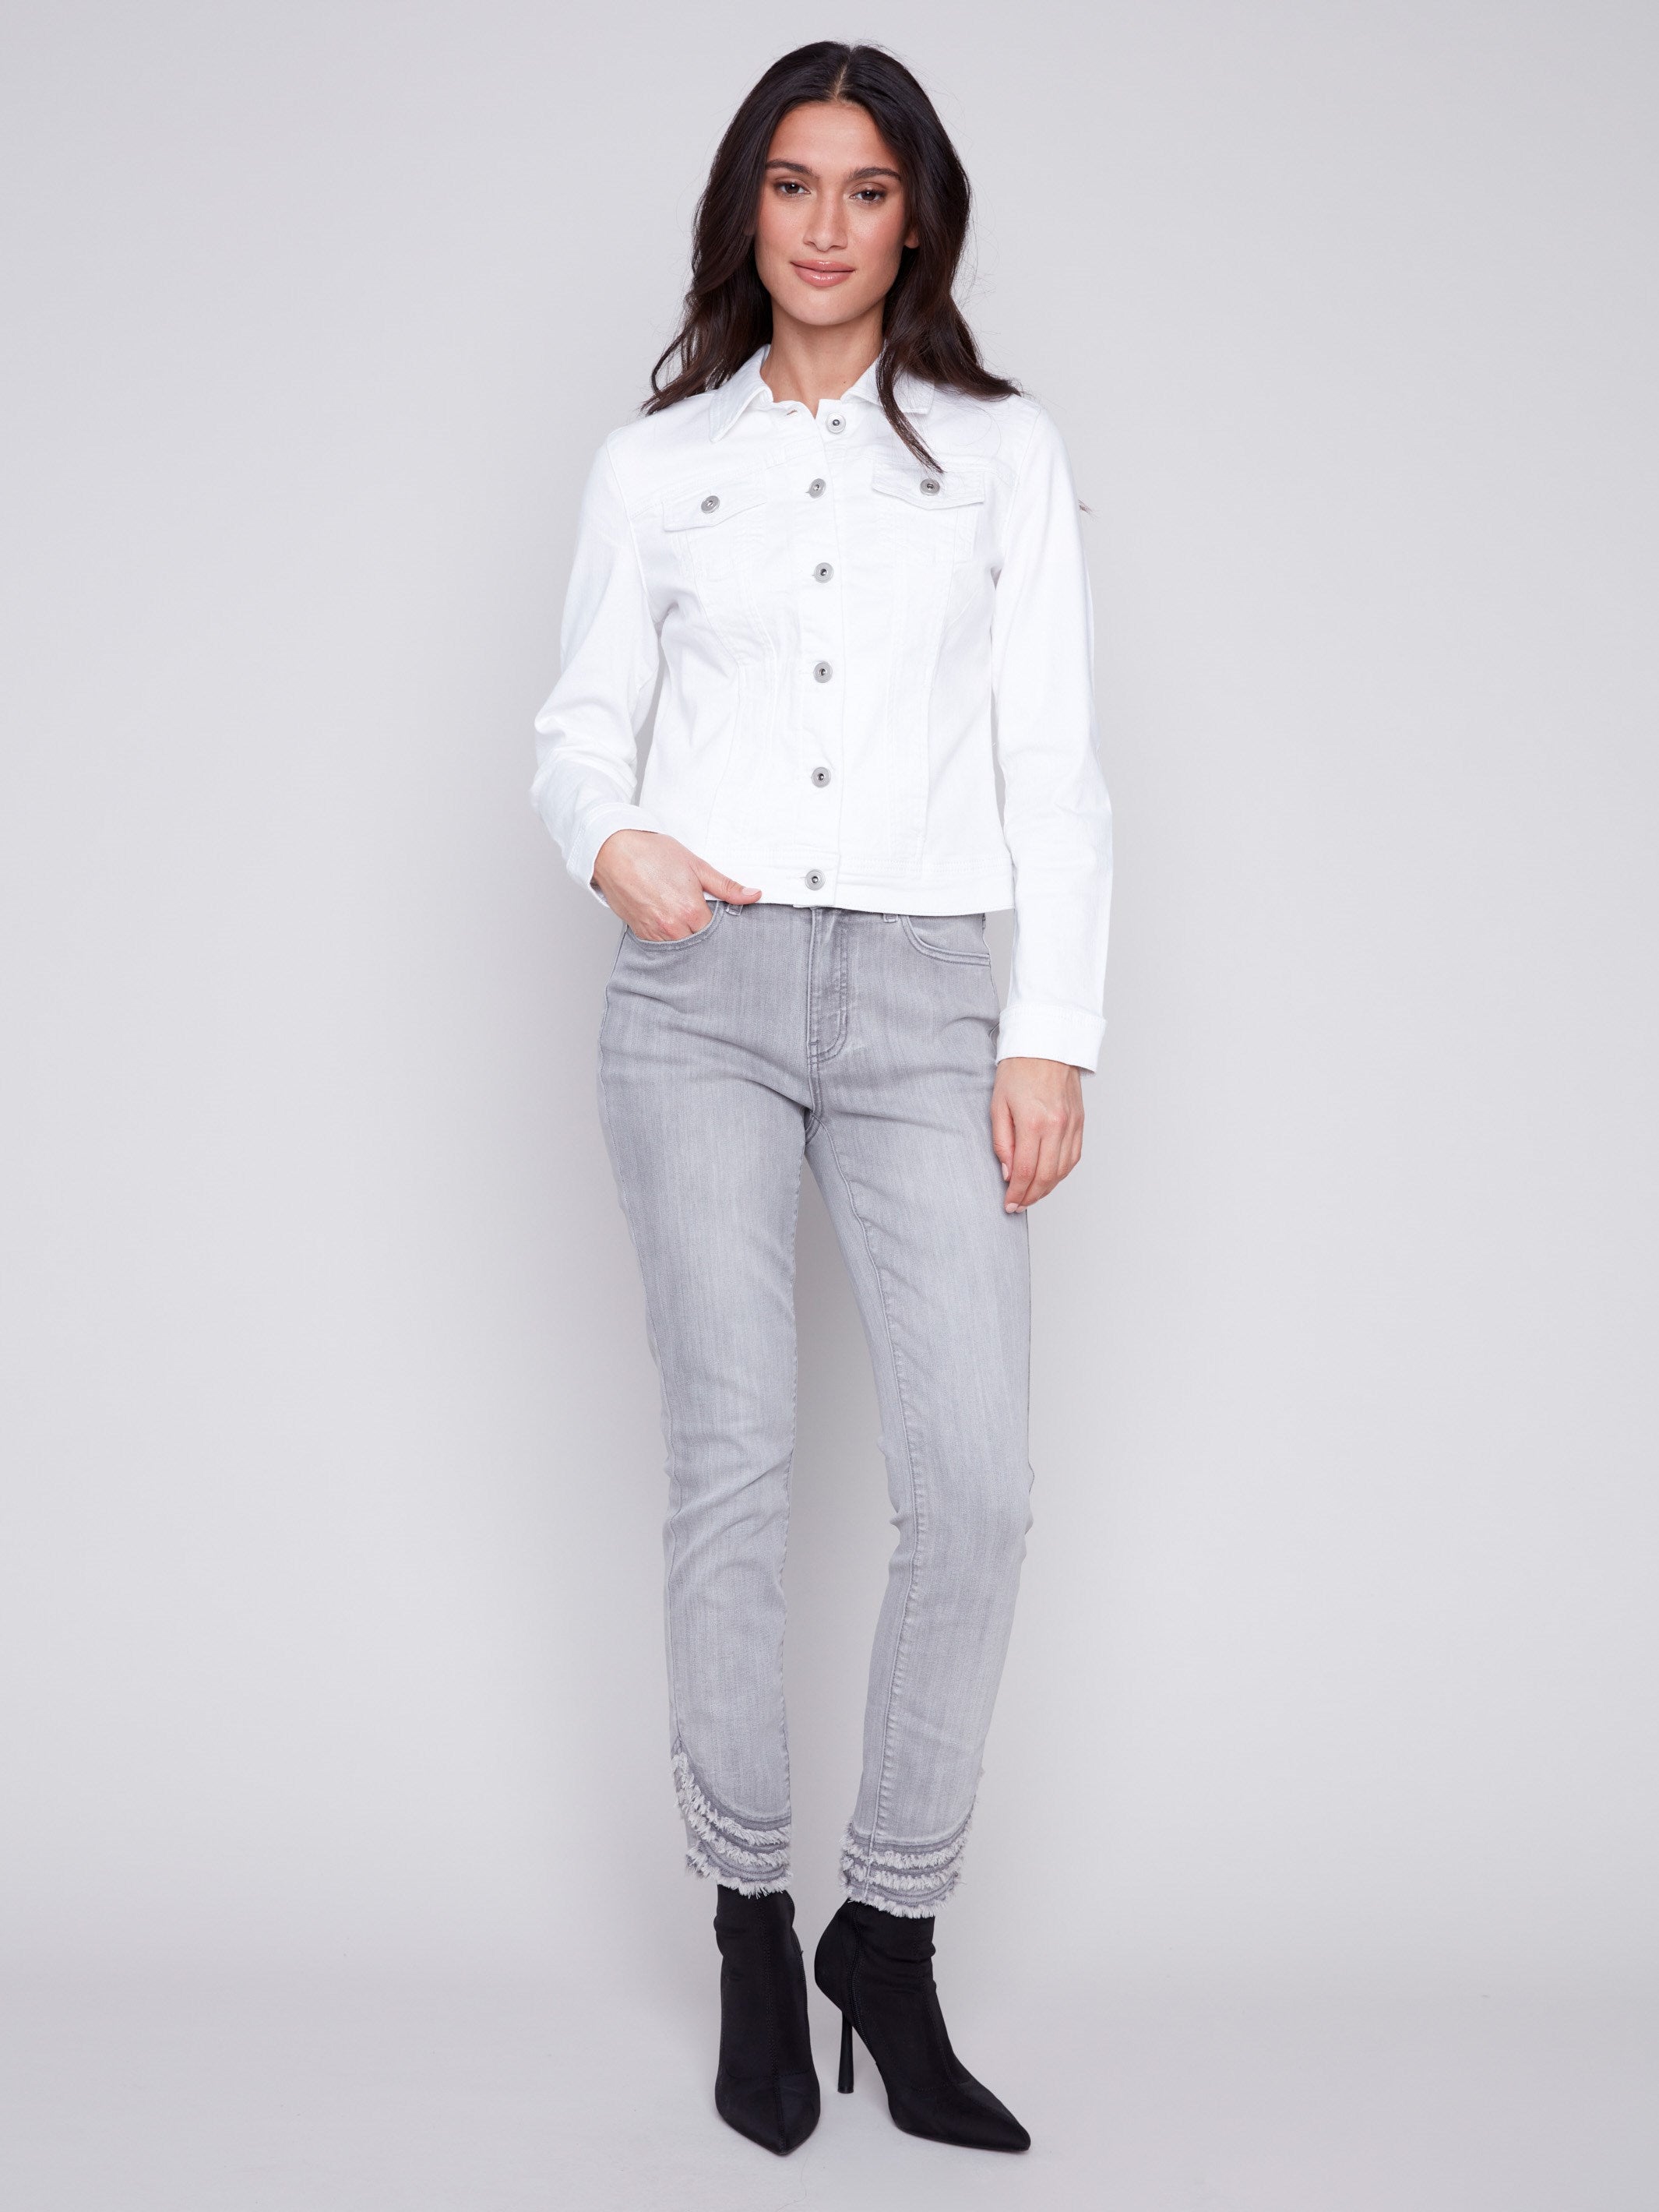 Stretch Denim Jacket - White - Charlie B Collection Canada - Image 3